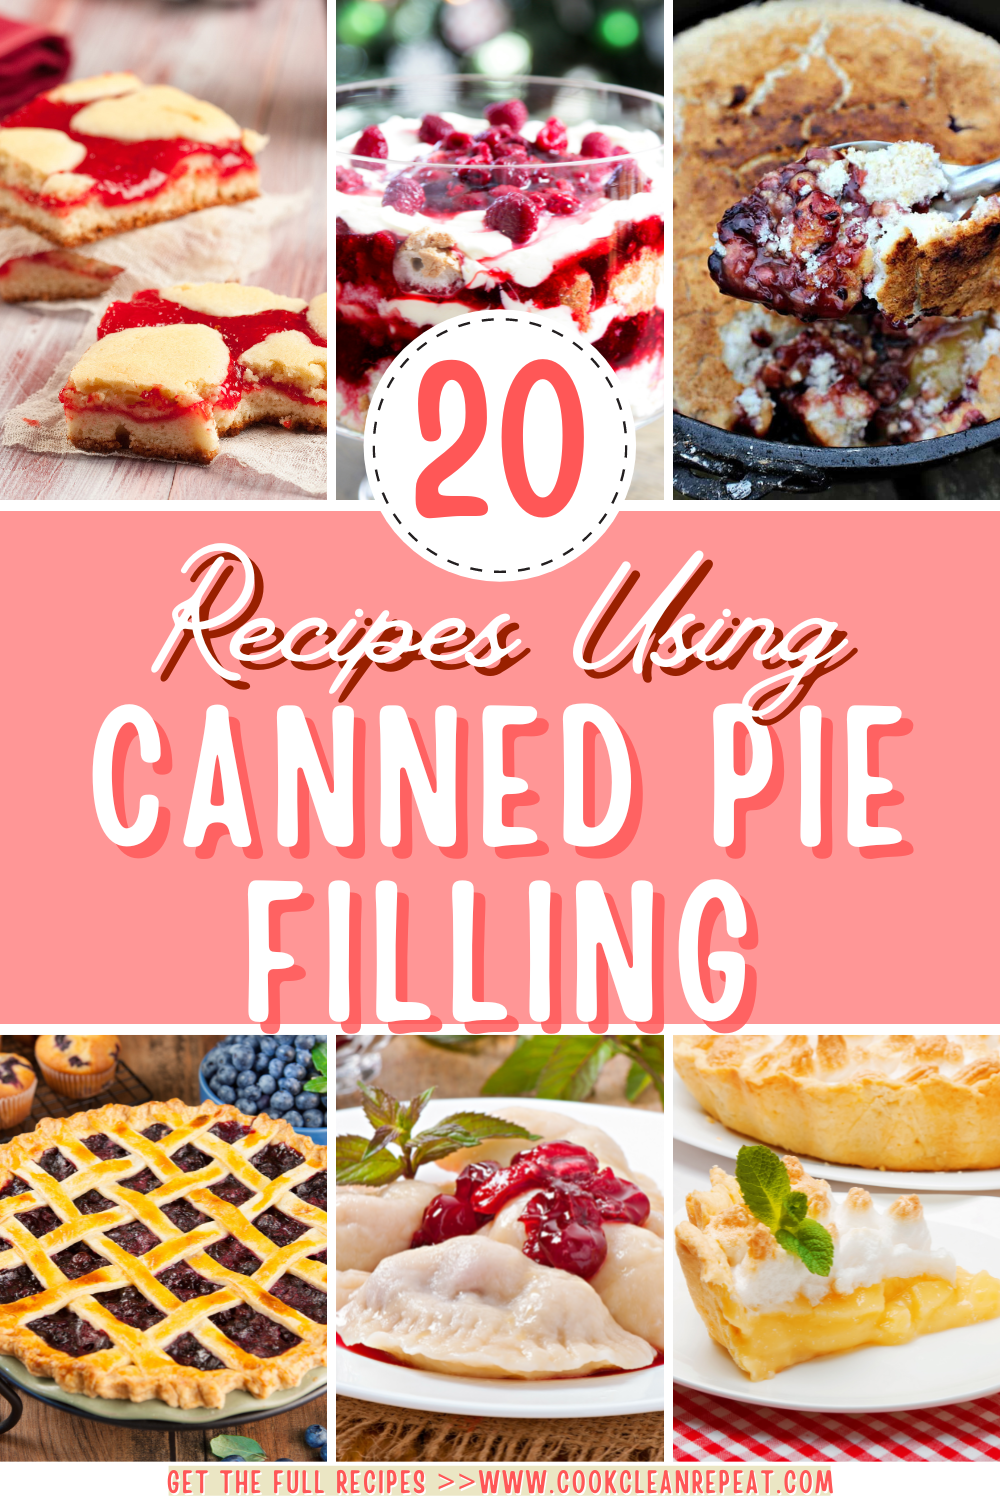 Pin showing the title 20 Recipes Using Canned Pie Filling